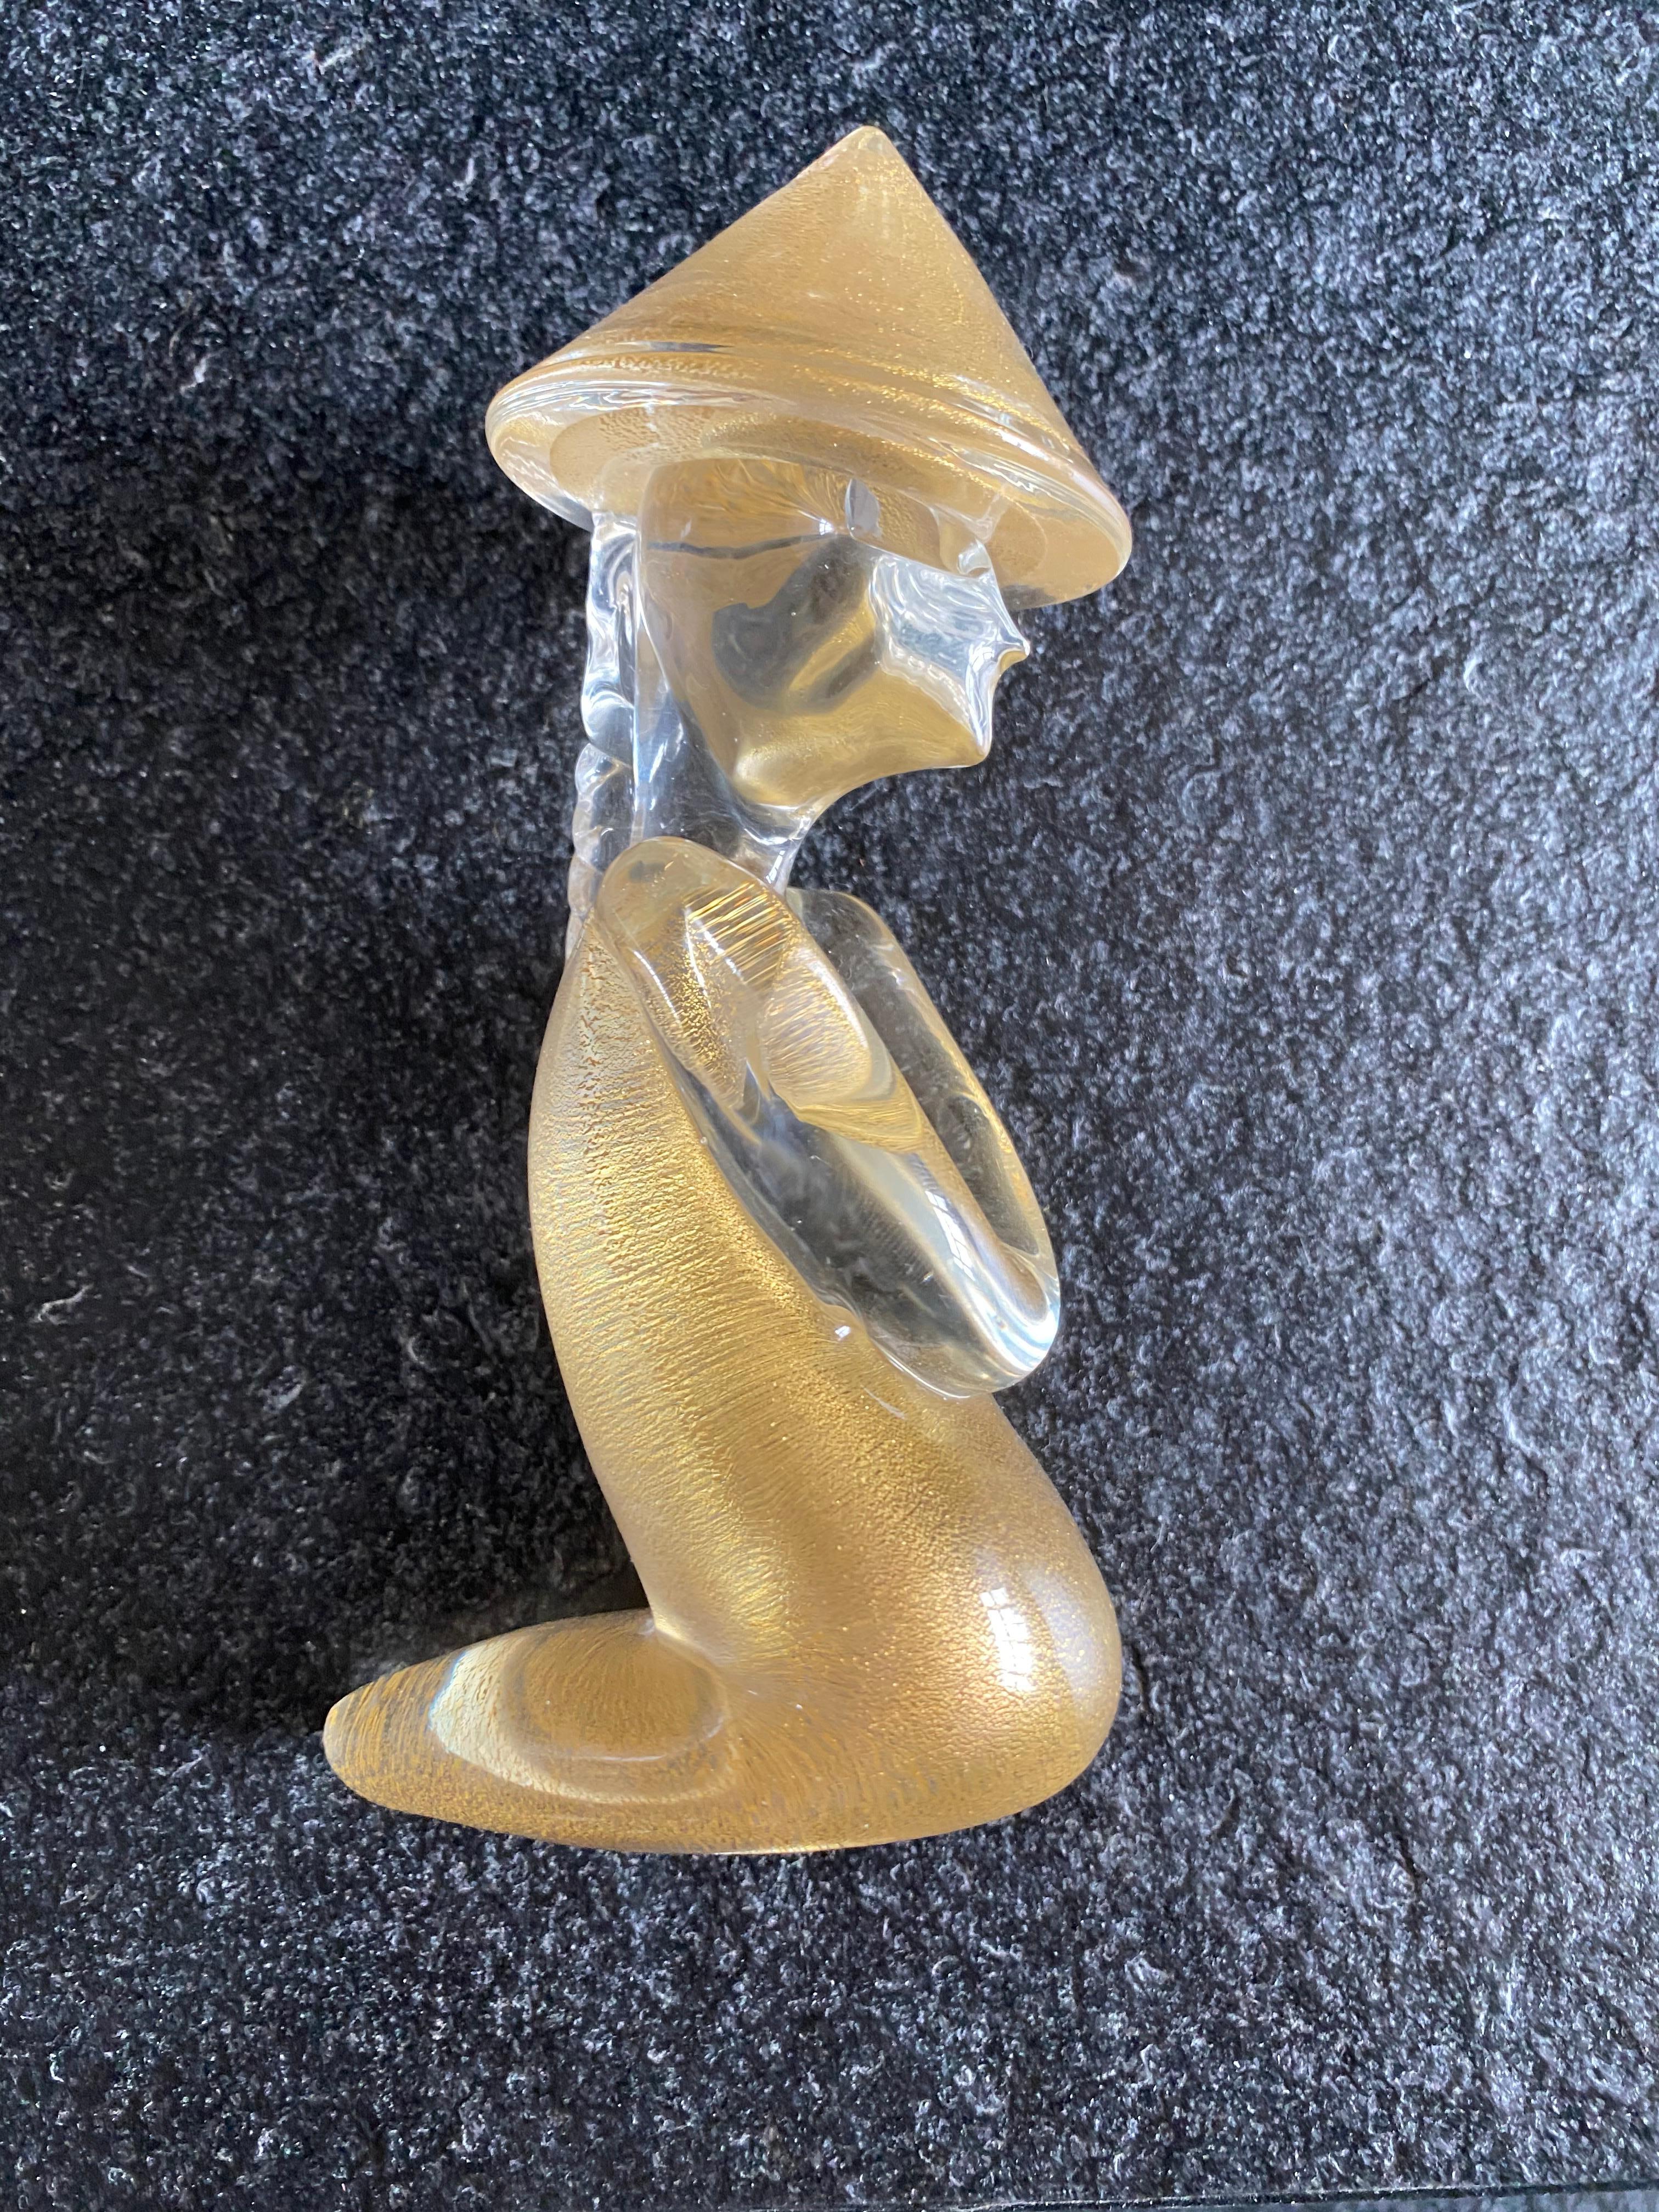 Toso
Murano
Ravishing statuette in Murano glass
Chinese
Murano and gold flakes
Perfect condition
circa 1980
Measures: H 16 x D 10 x W 6 cms
390 euros.